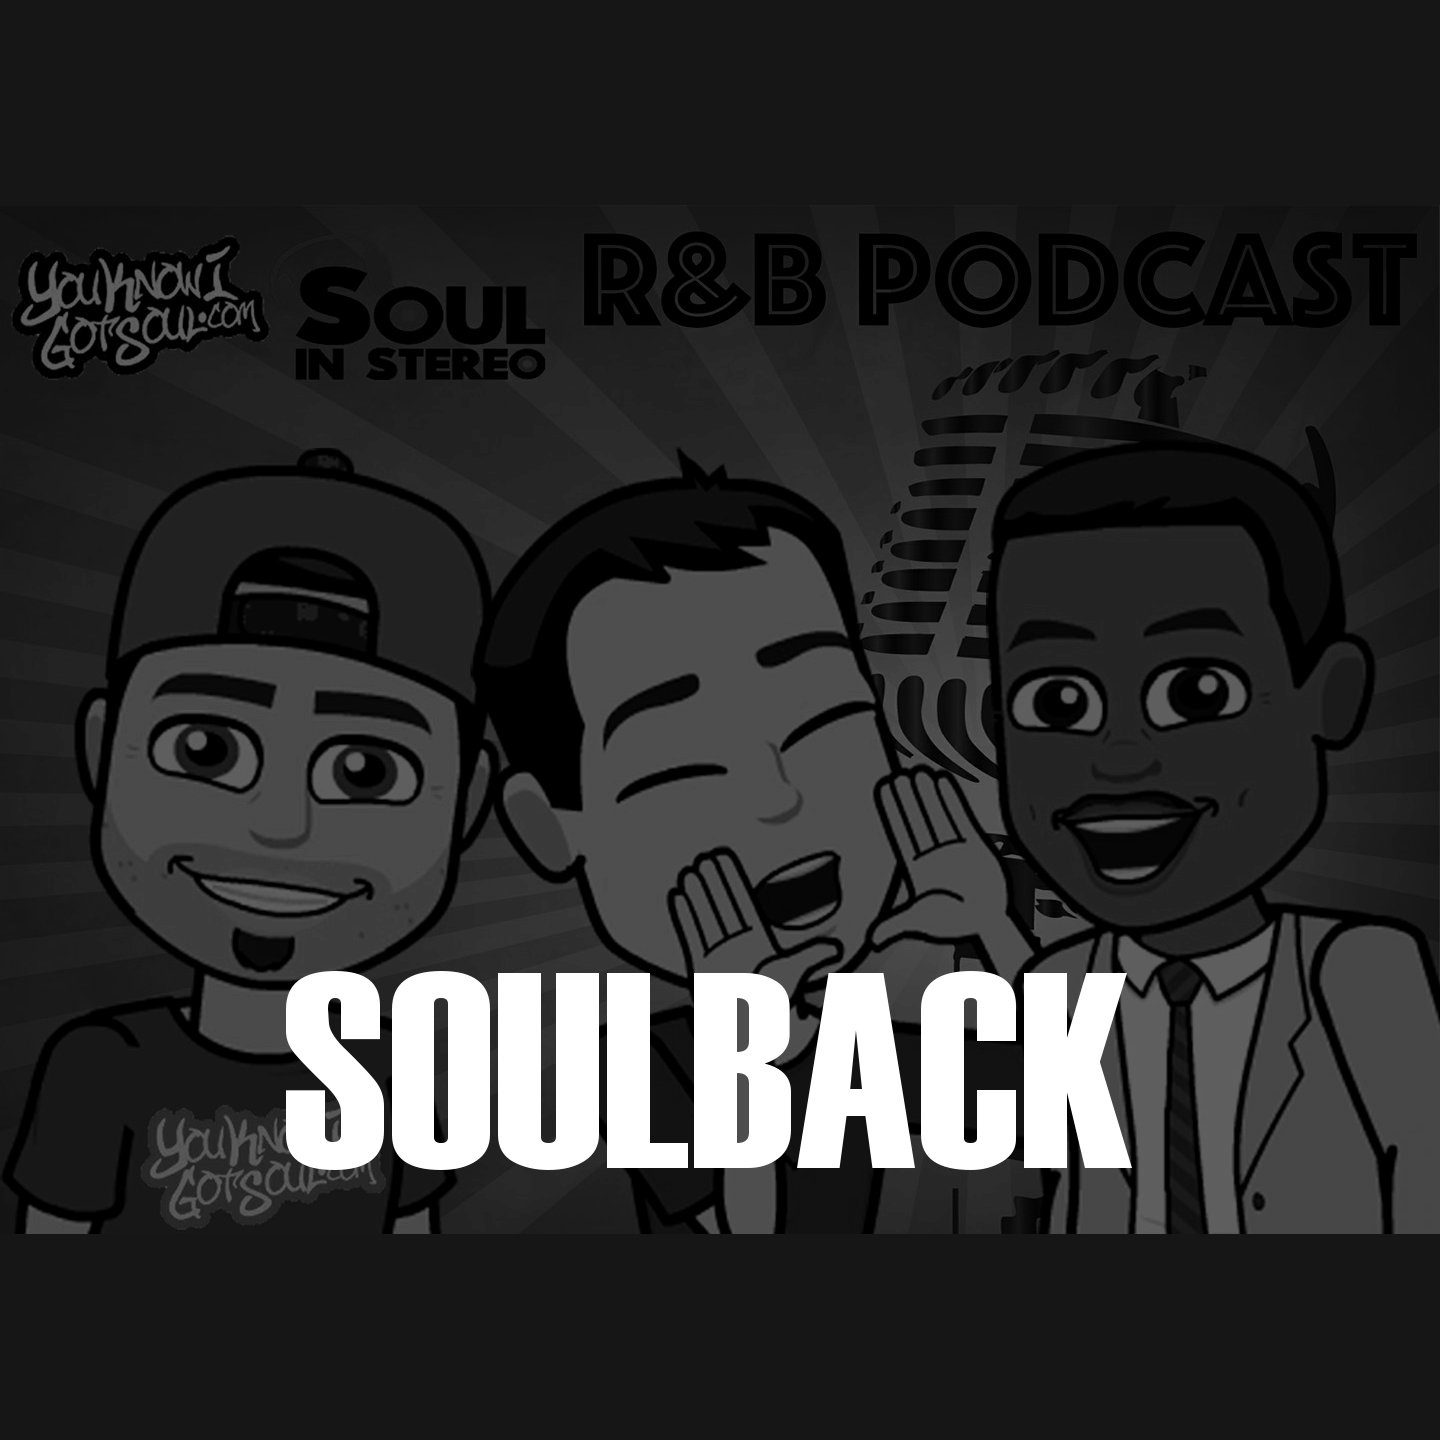 SoulBack (featuring J. Holiday) – The R&B Podcast Episode 6